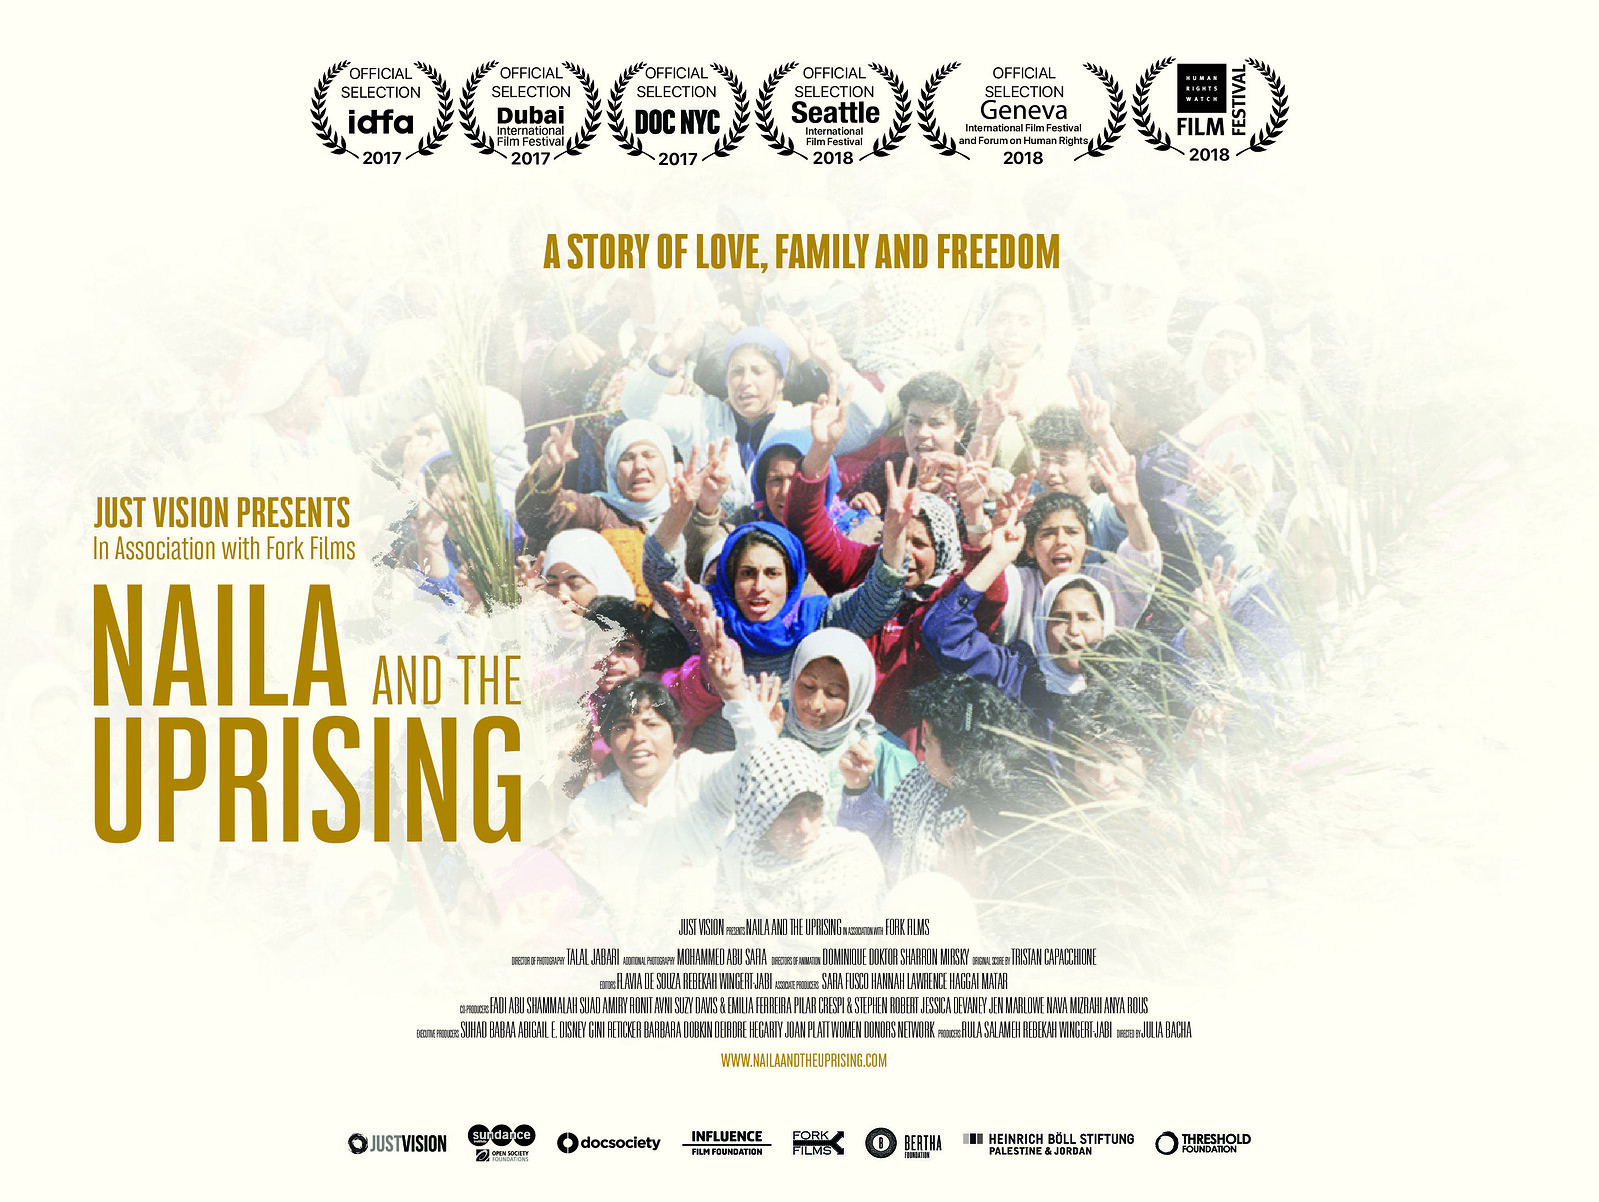 Naila and the Uprising - screening and discussion at Easton Community Centre